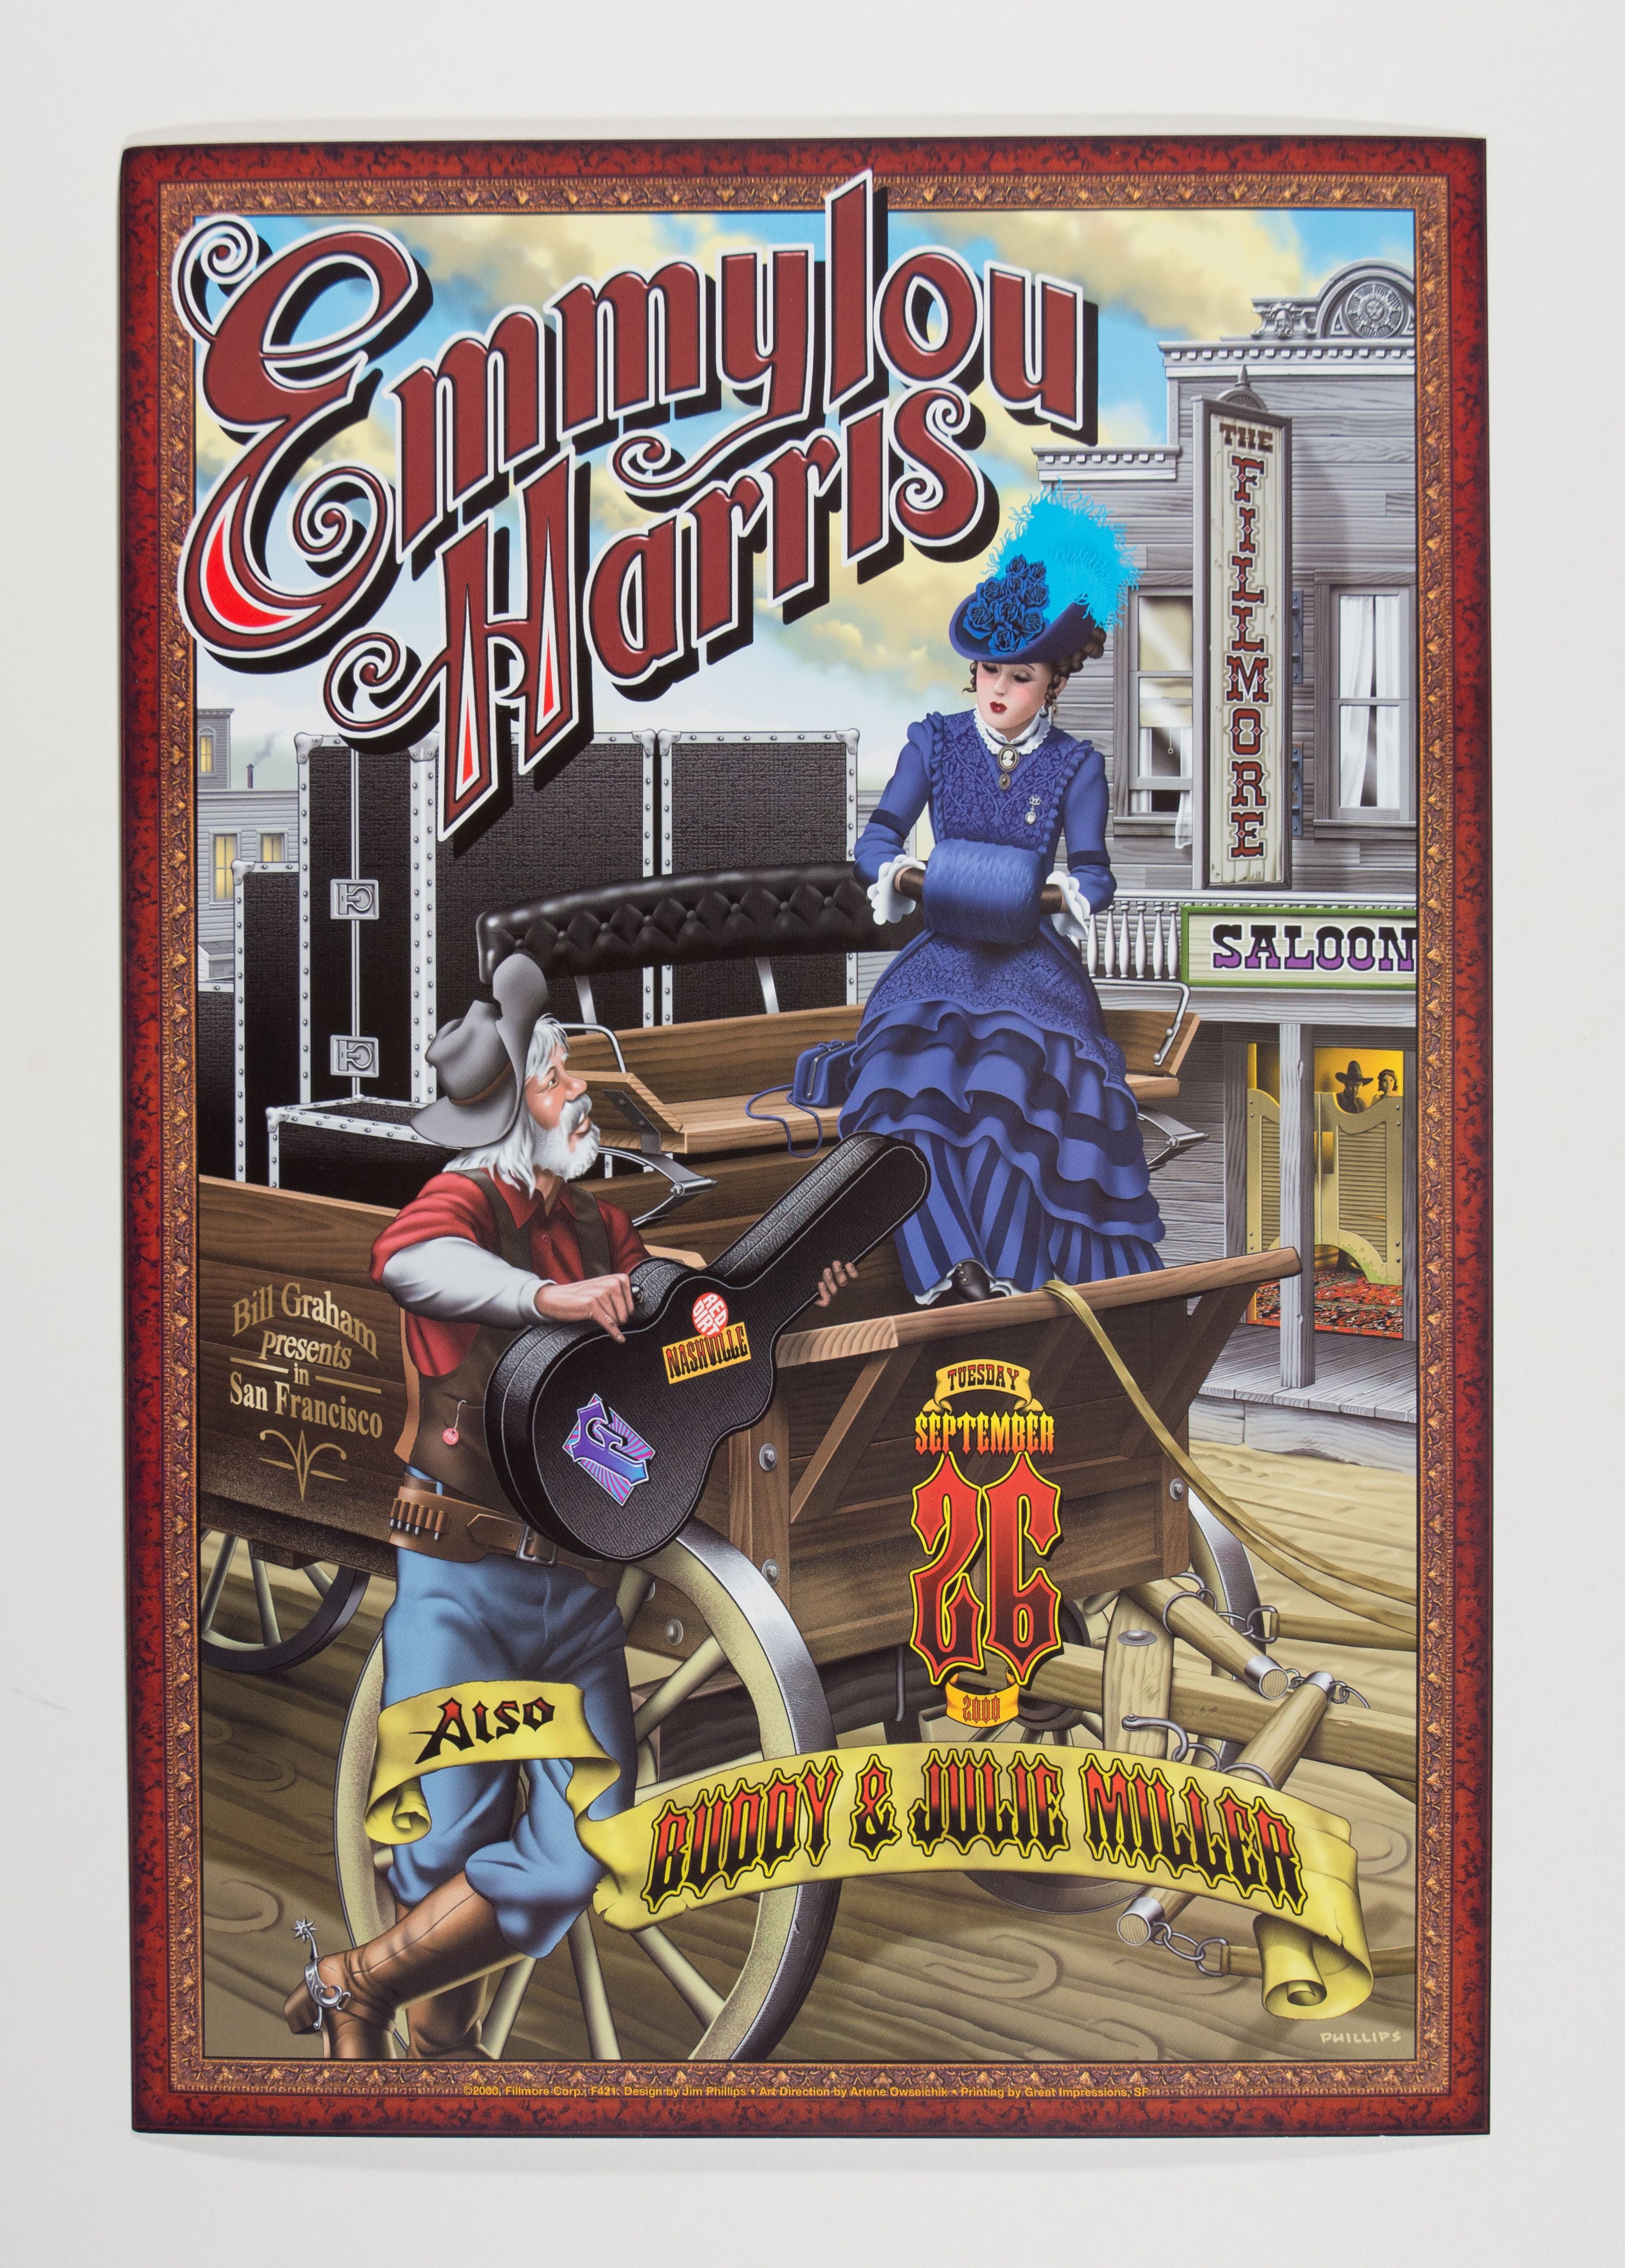 2000-Emmylou Harris with Buddy and Julie Miller Concert Poster-The Fillmore-San Francisco, CA